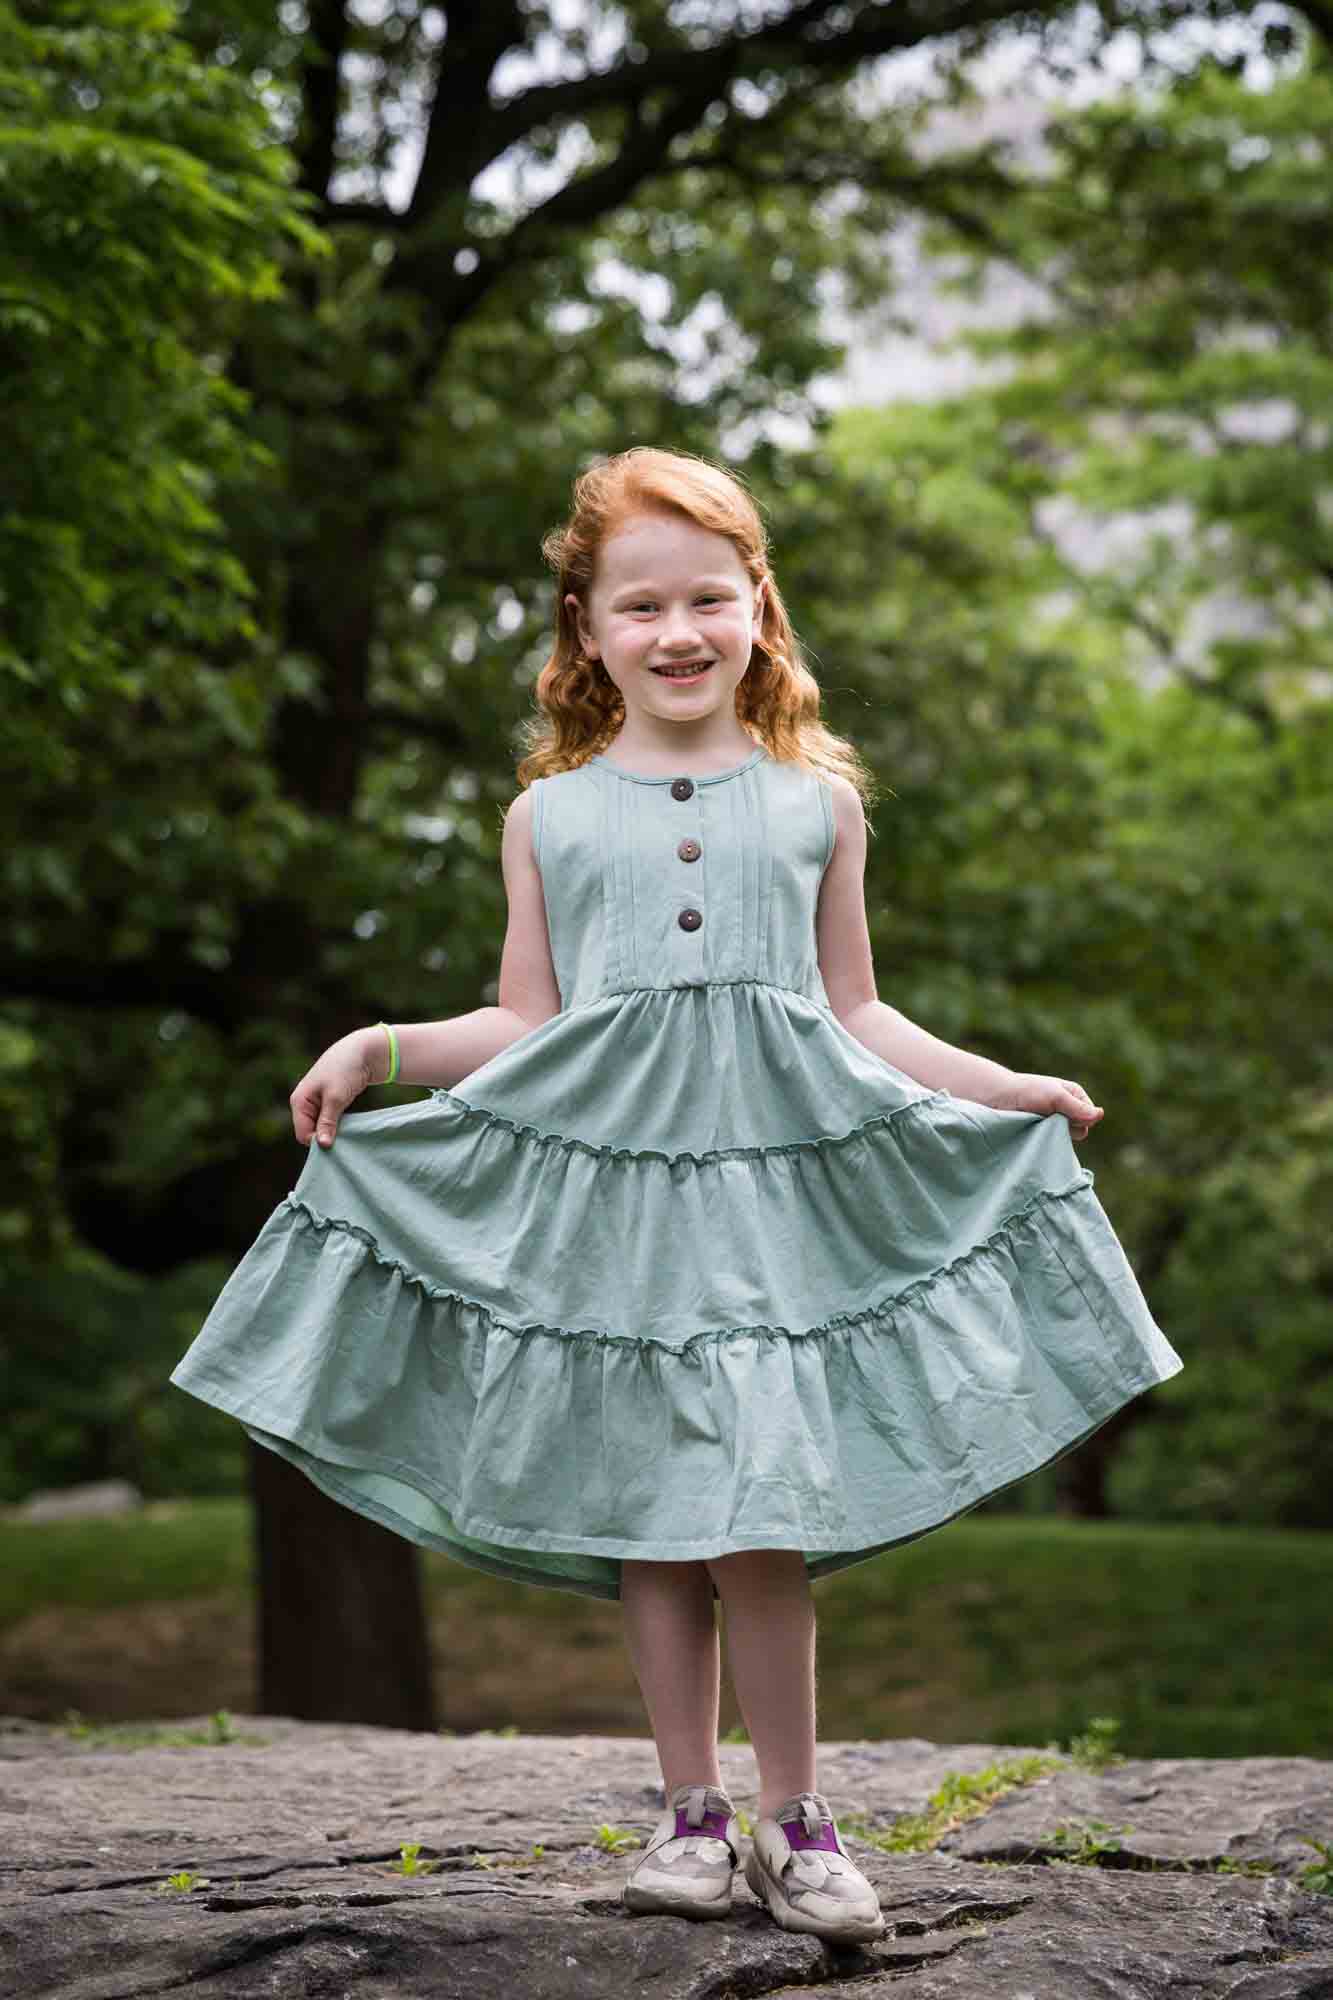 Little red-haired girl wearing green dress dancing on rock during a Central Park family portrait session